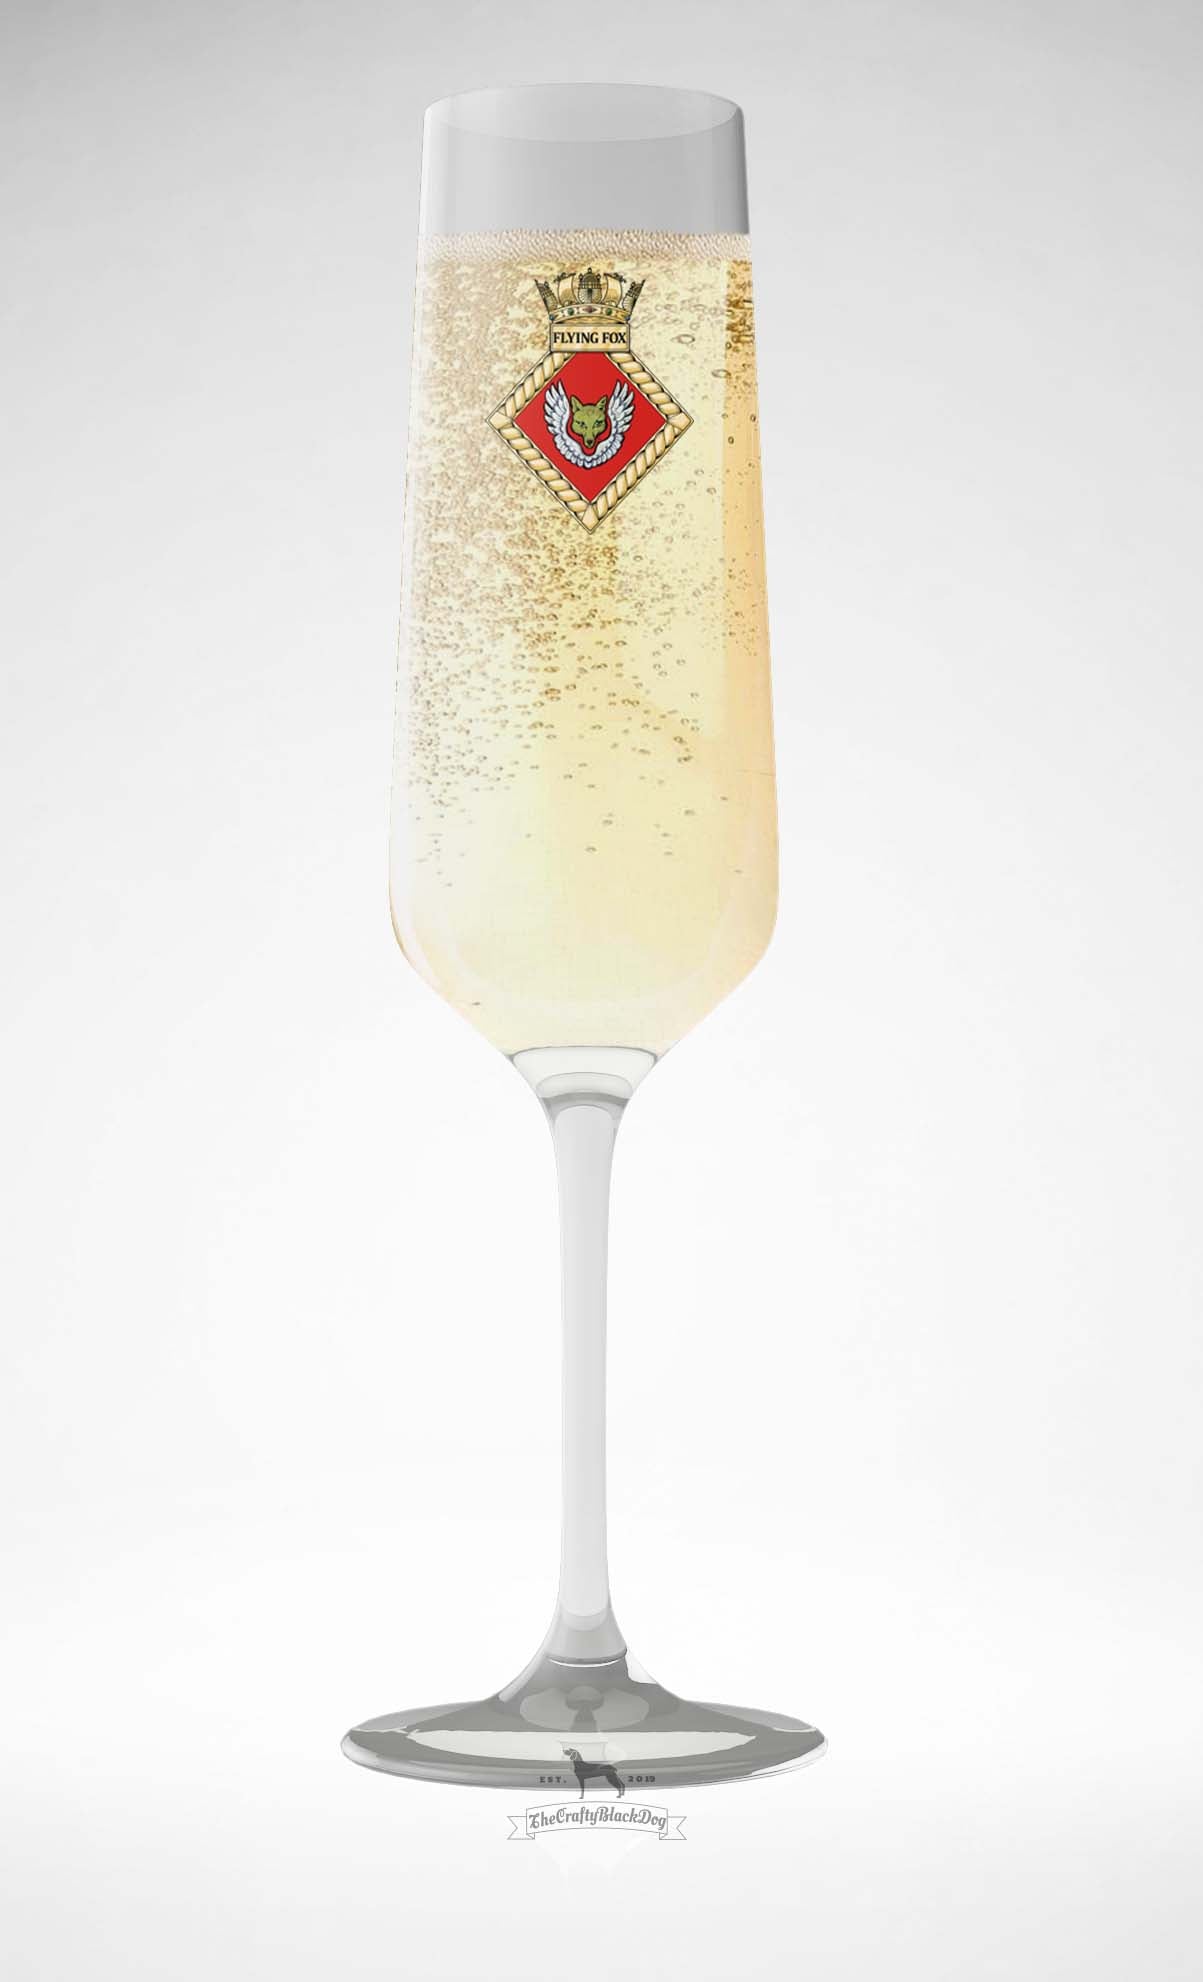 HMS Flying Fox - Champagne/Prosecco Flute